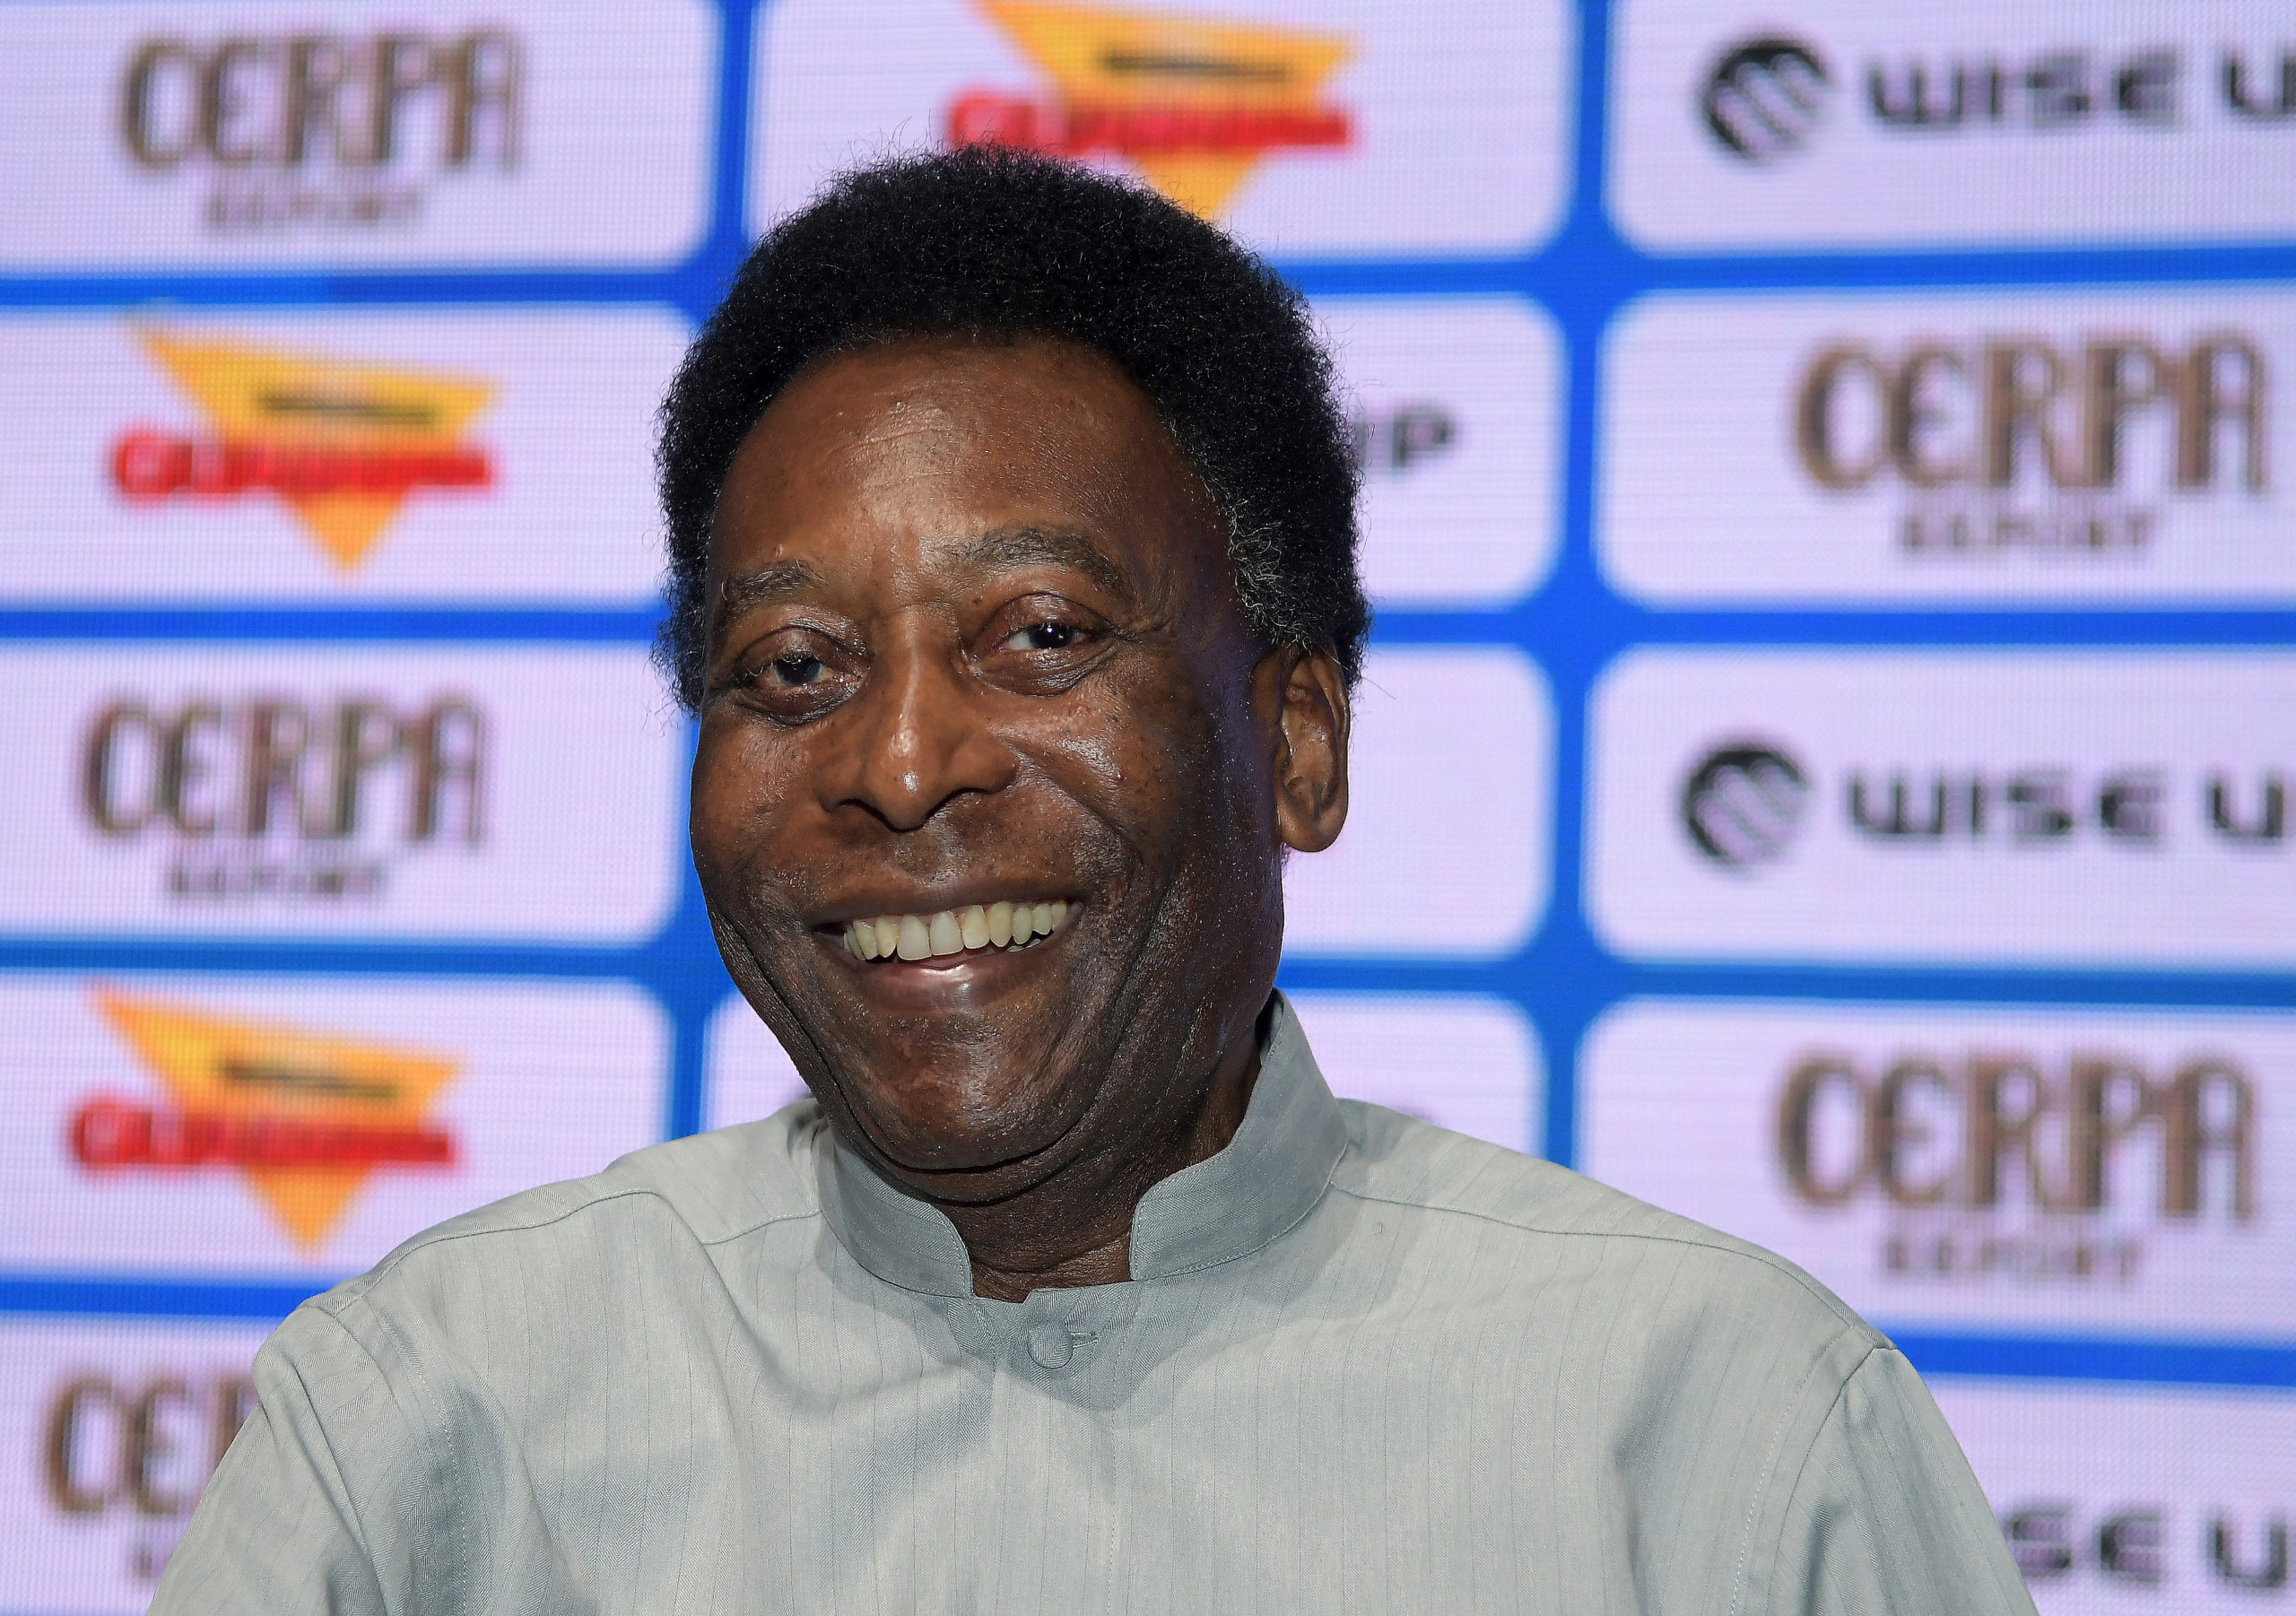 80-Year-Old Soccer Star Pelé Is Still in Intensive Care But Looks Forward to Hitting the Field Again Soon